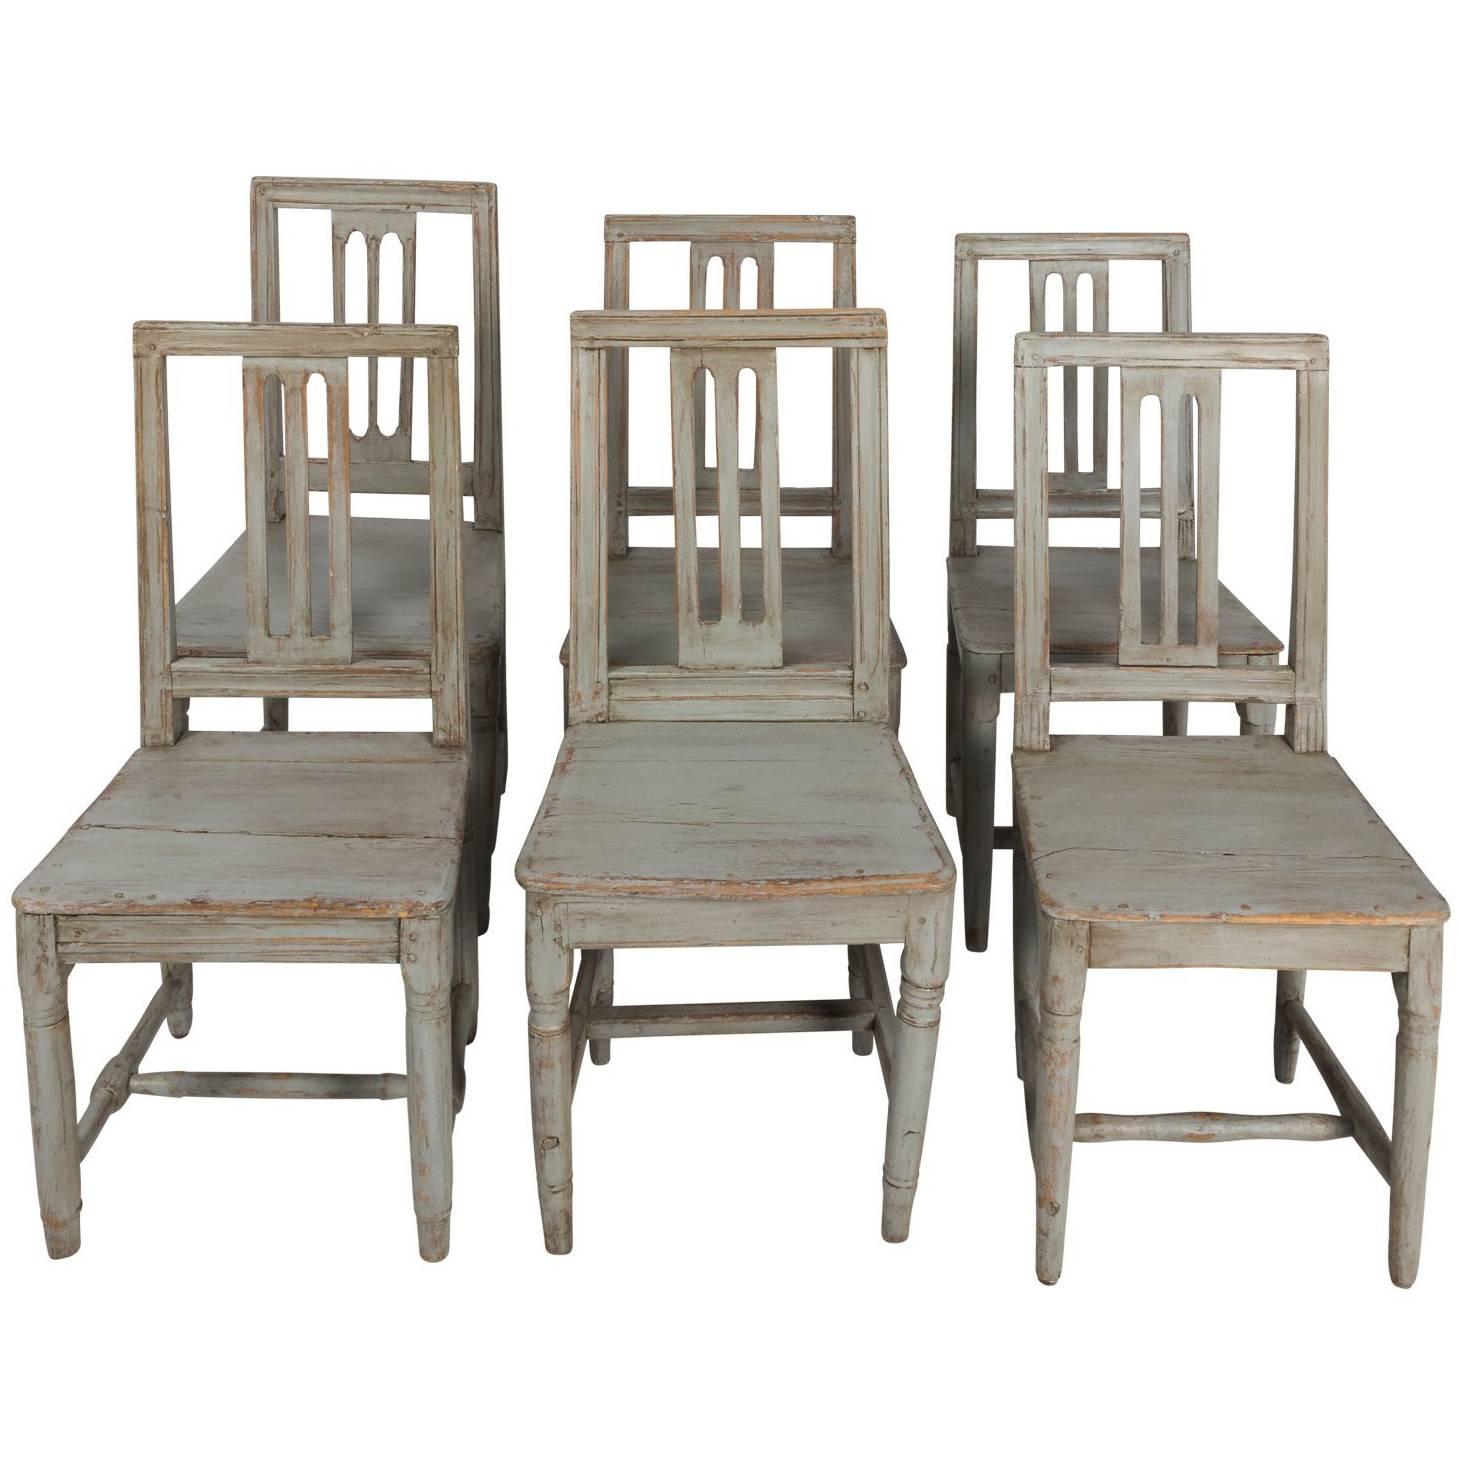 Set of Six Similar Painted Pinewood Chairs For Sale